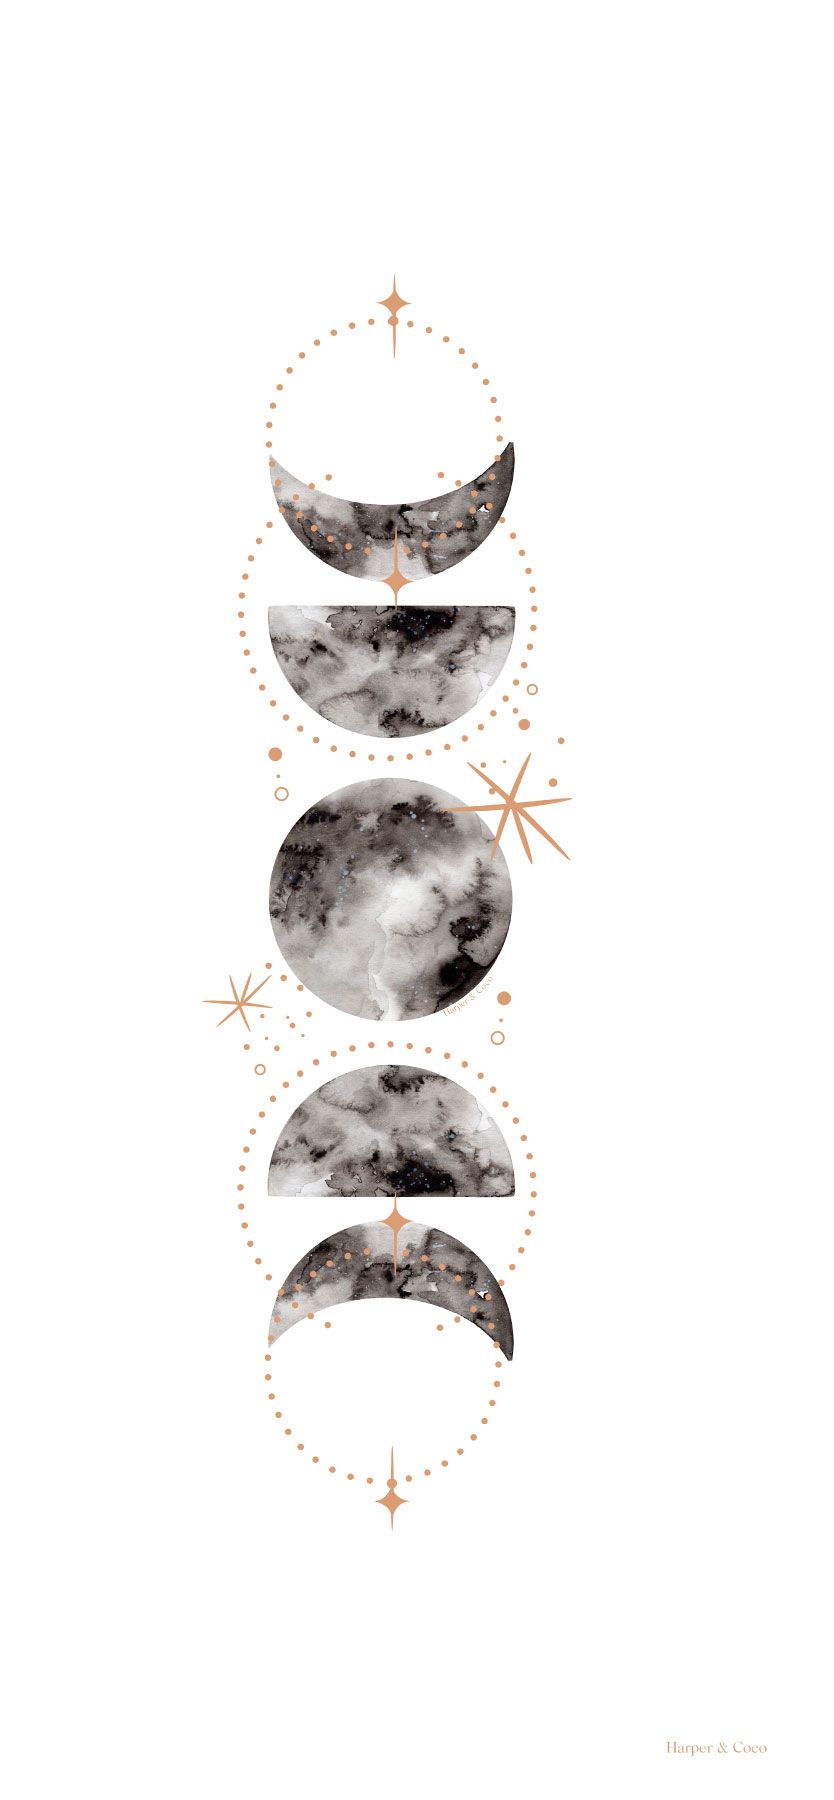 Moon Phases iPhone Wallpaper. iPhone wallpaper moon, Live wallpaper iphone, Moon wall art